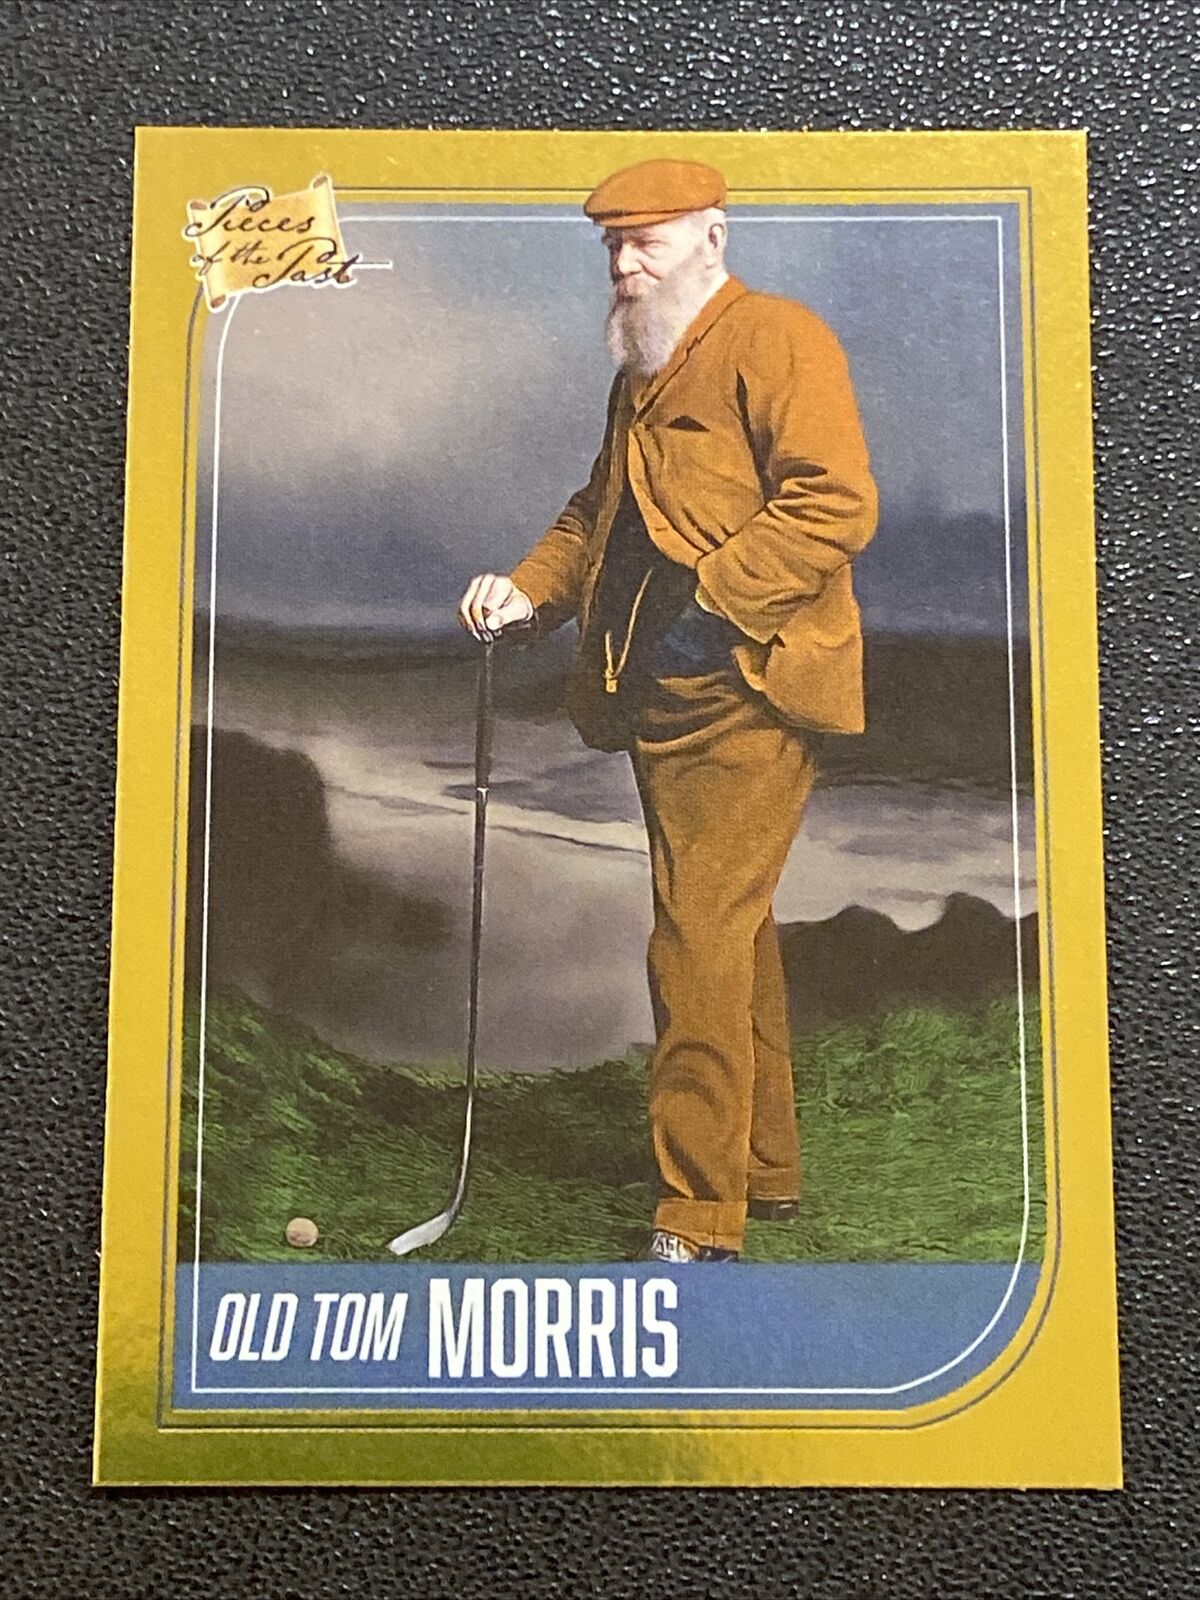 2021 Super Products Pieces of the Past Gold Mirror Tom Morris Old #70